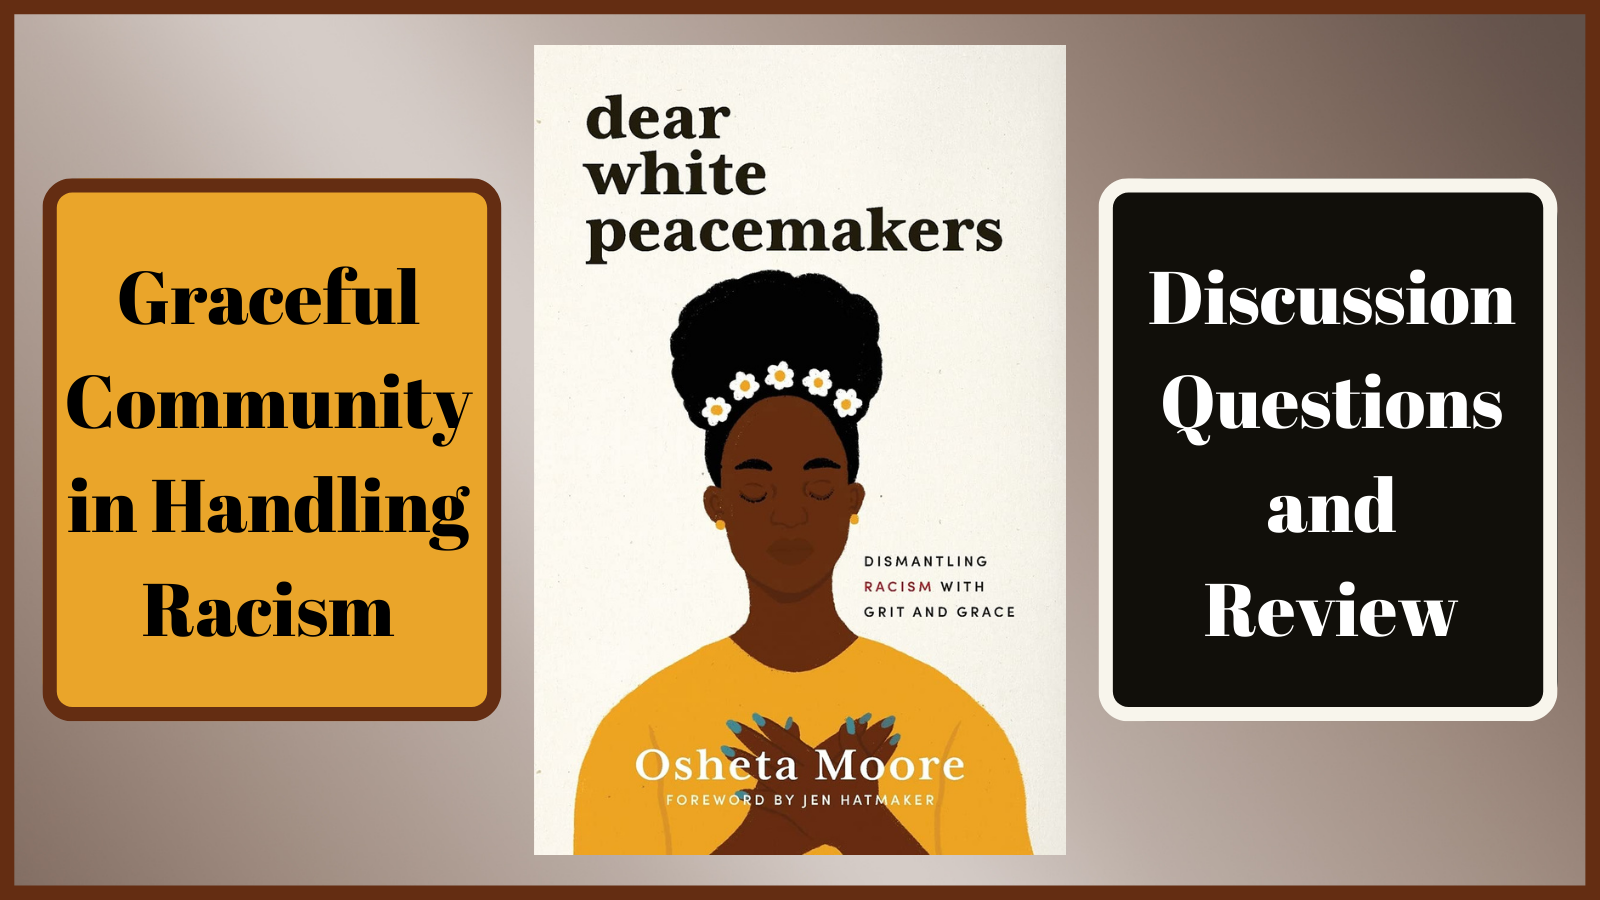 Dear White Peacemakers Discussion Questions